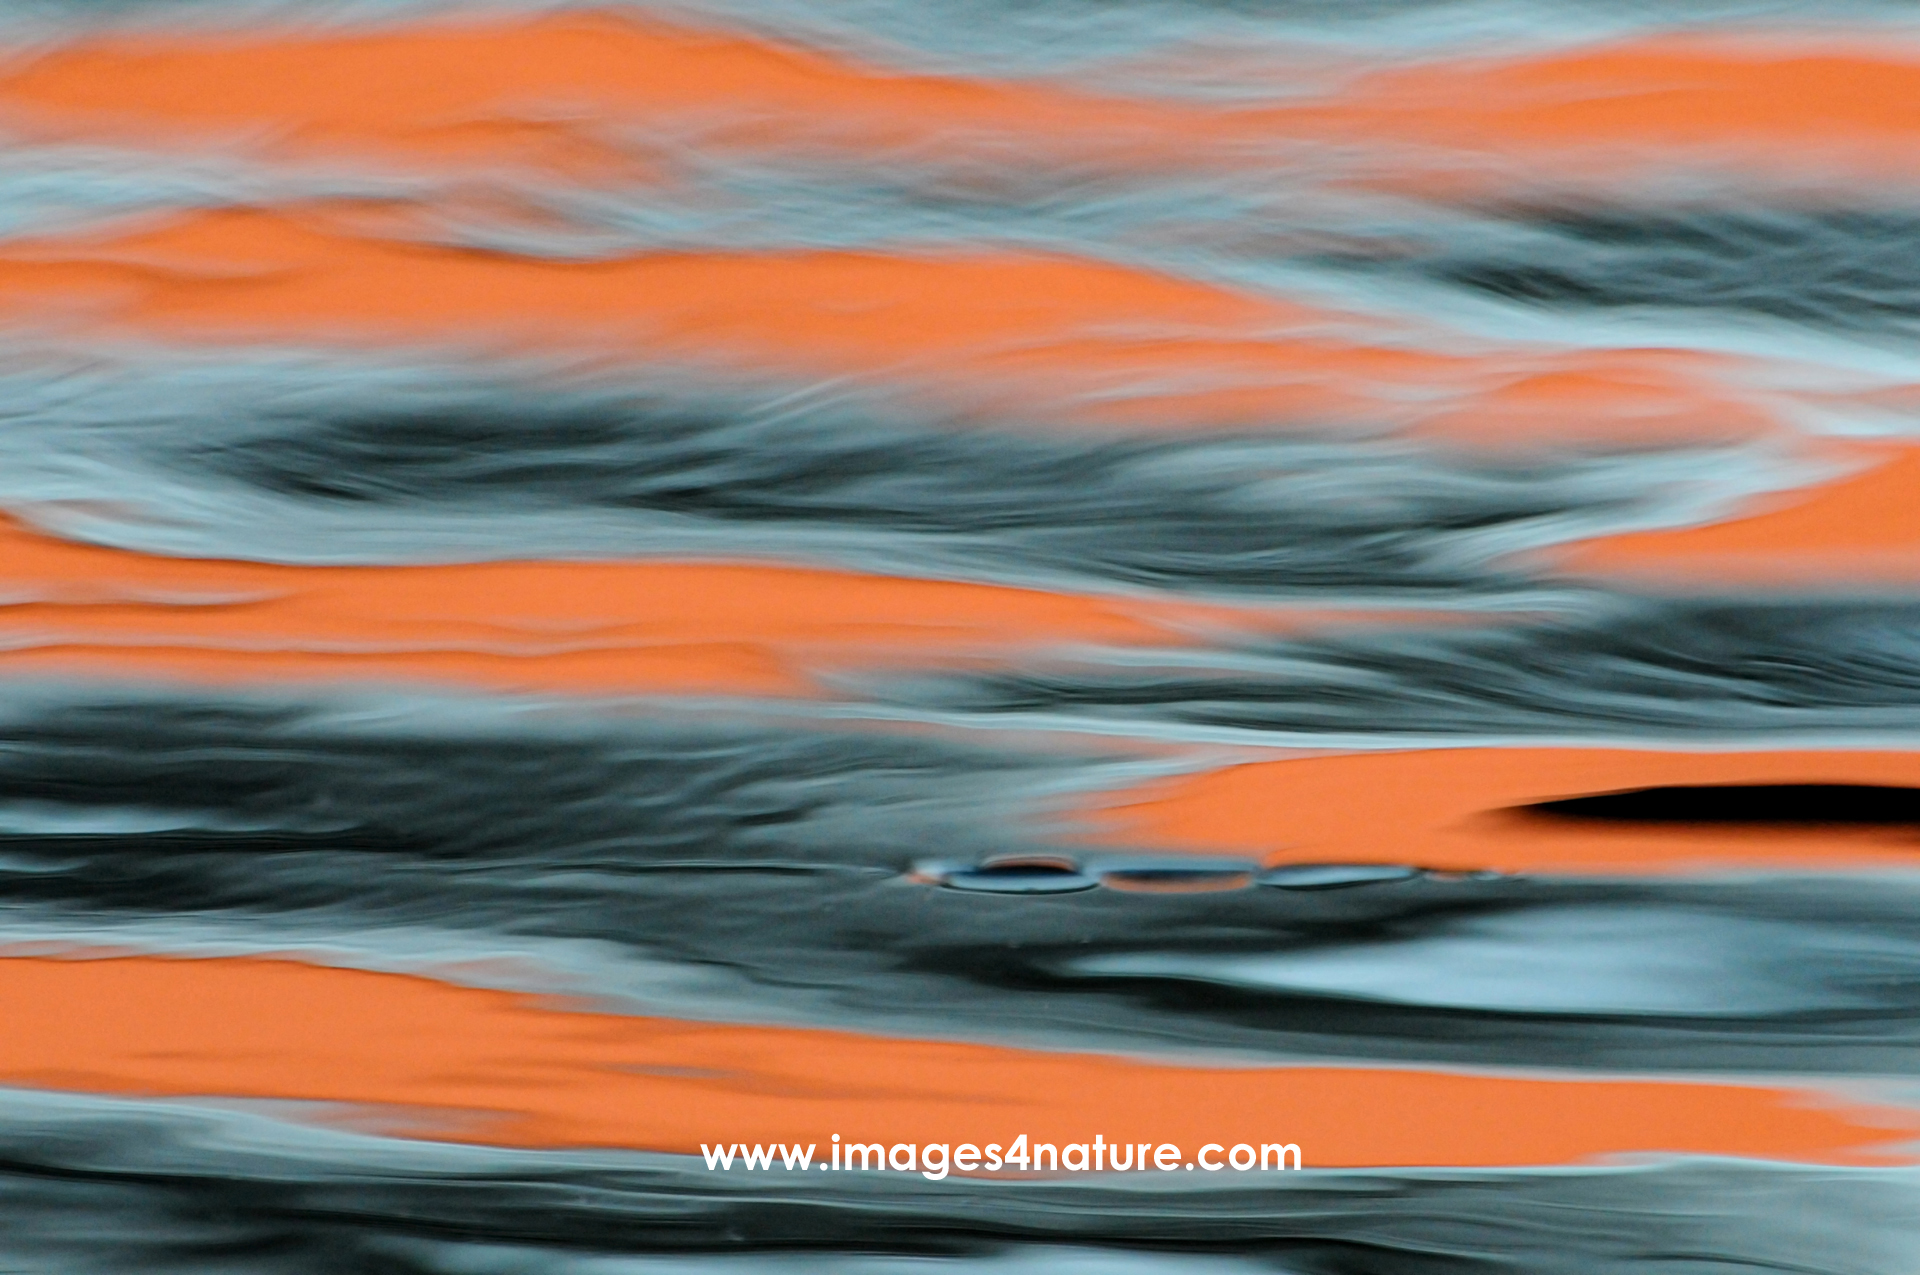 Abstract close-up on water surface with orange light reflections